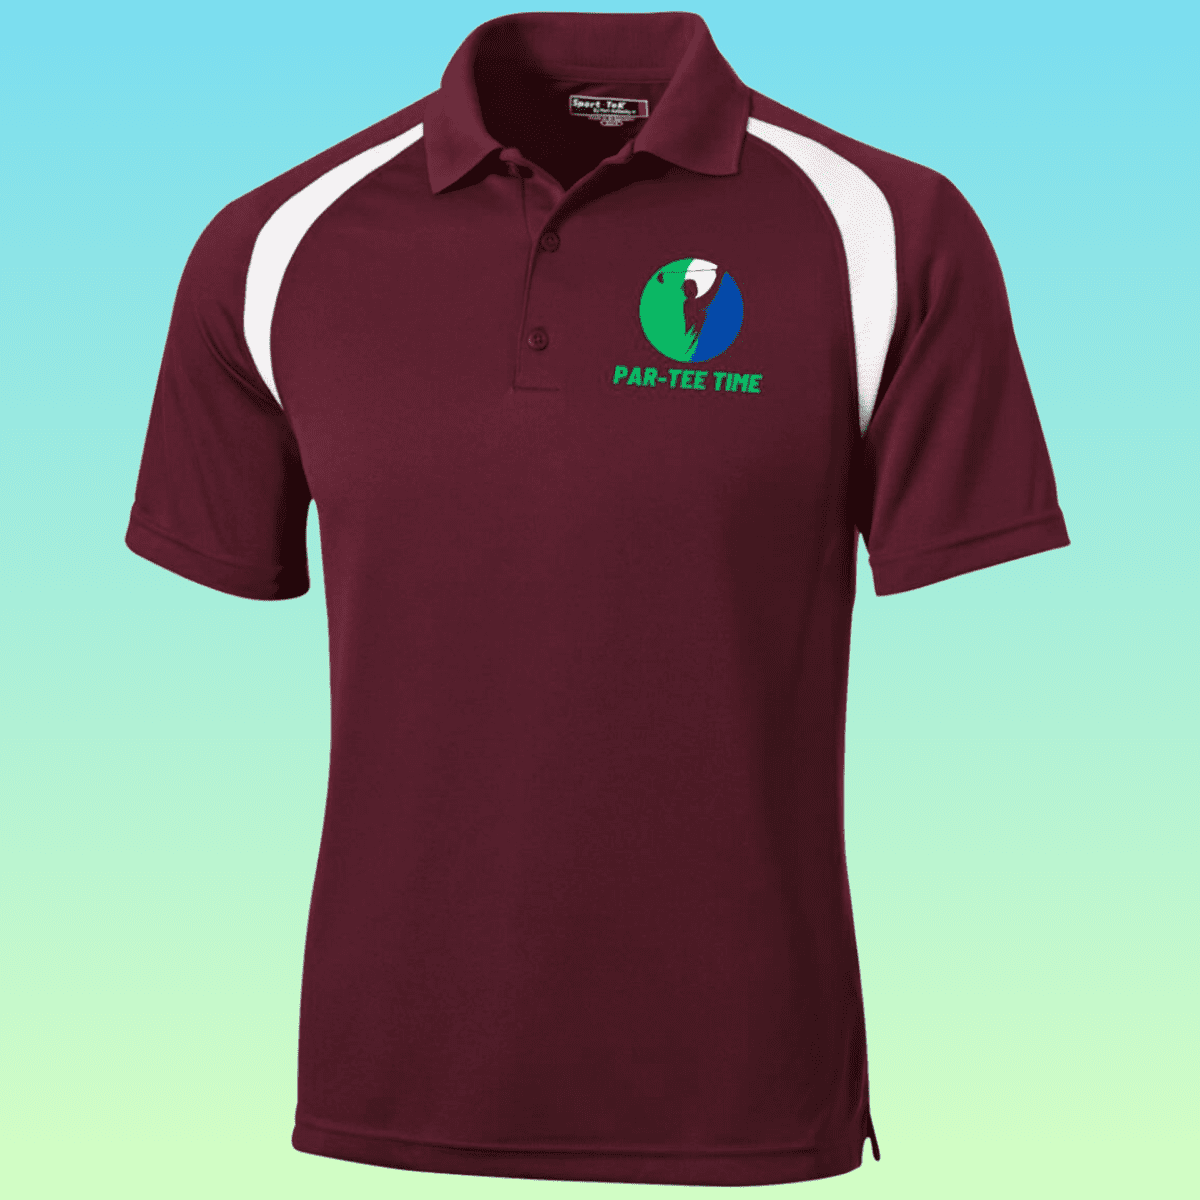 Men's Maroon and White Golf Par-tee Time Moisture-Wicking Polo Shirt